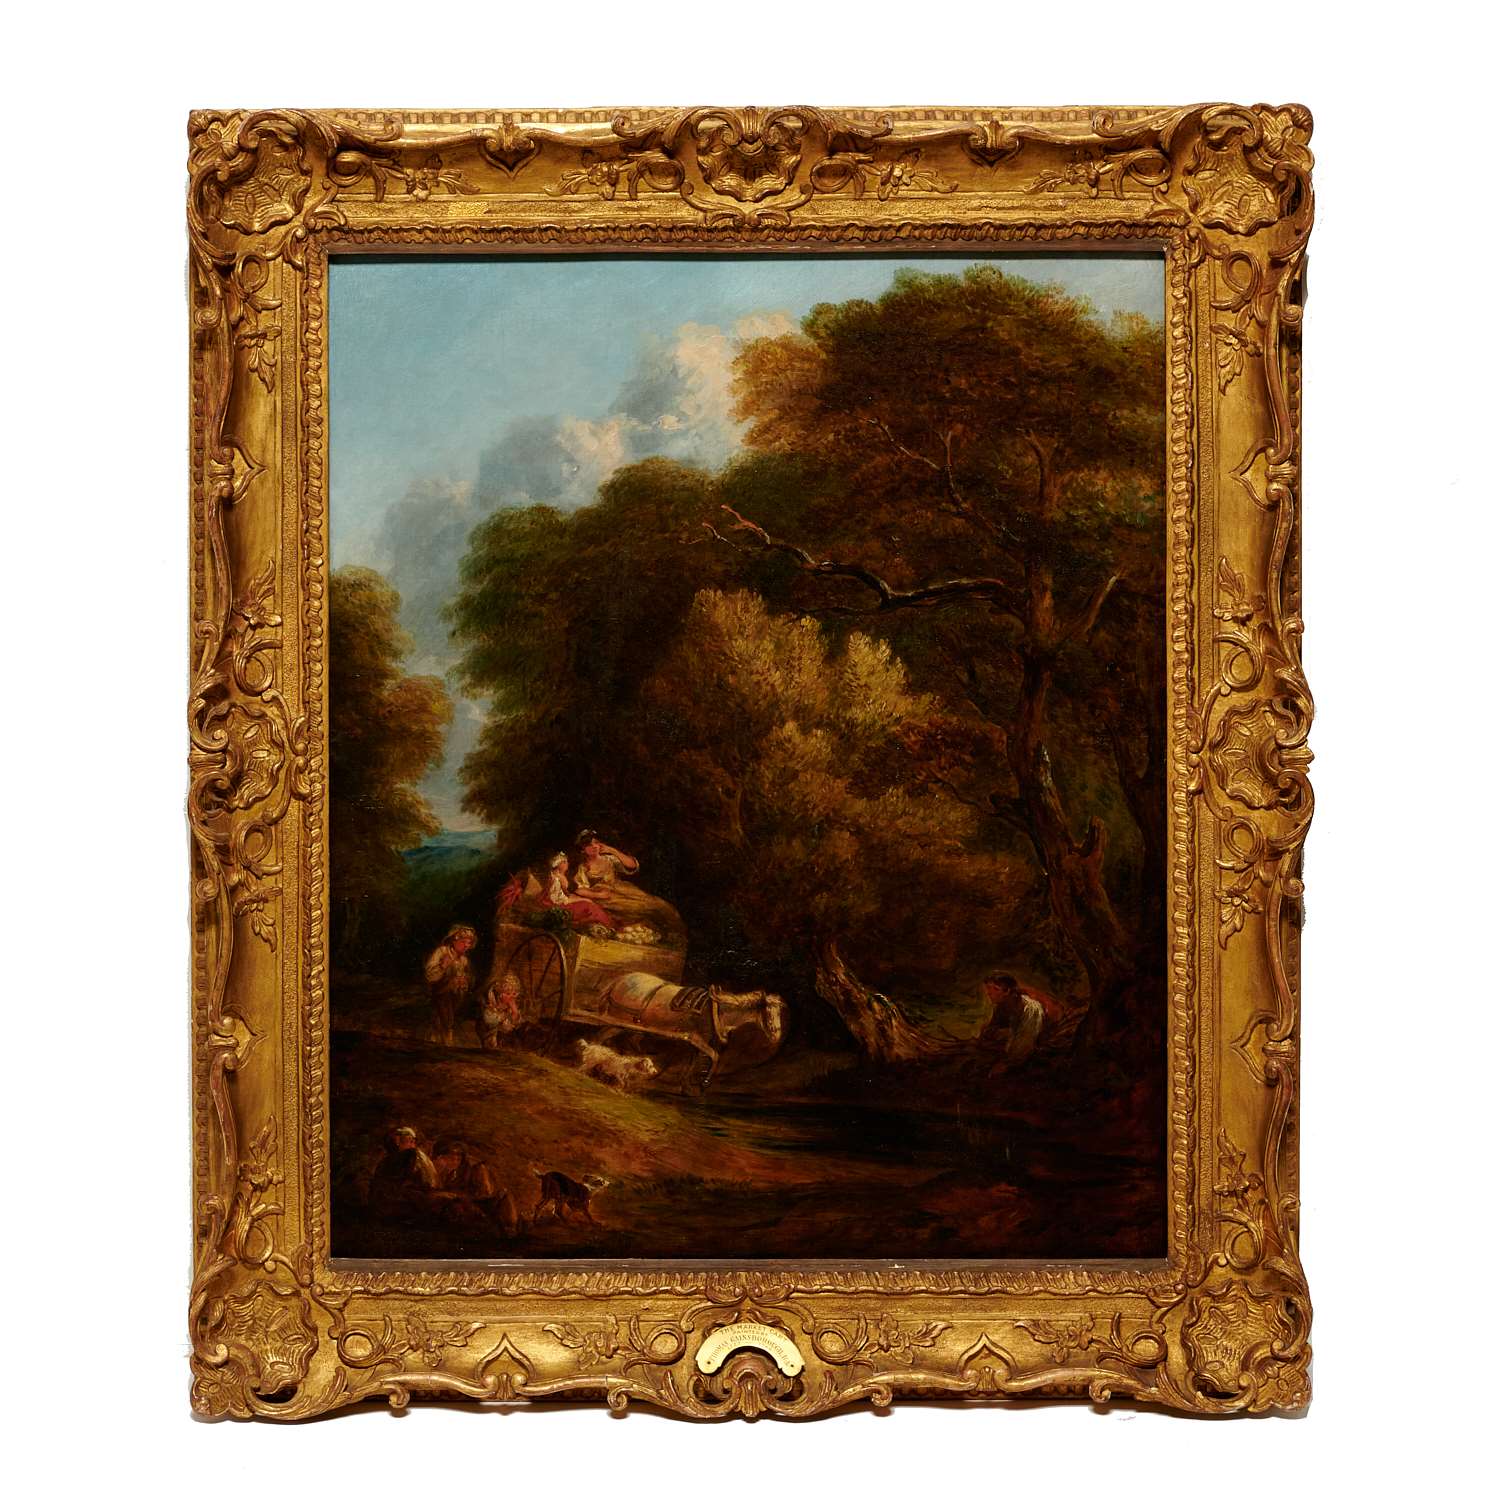 THOMAS GAINSBOROUGH (AFTER), OIL